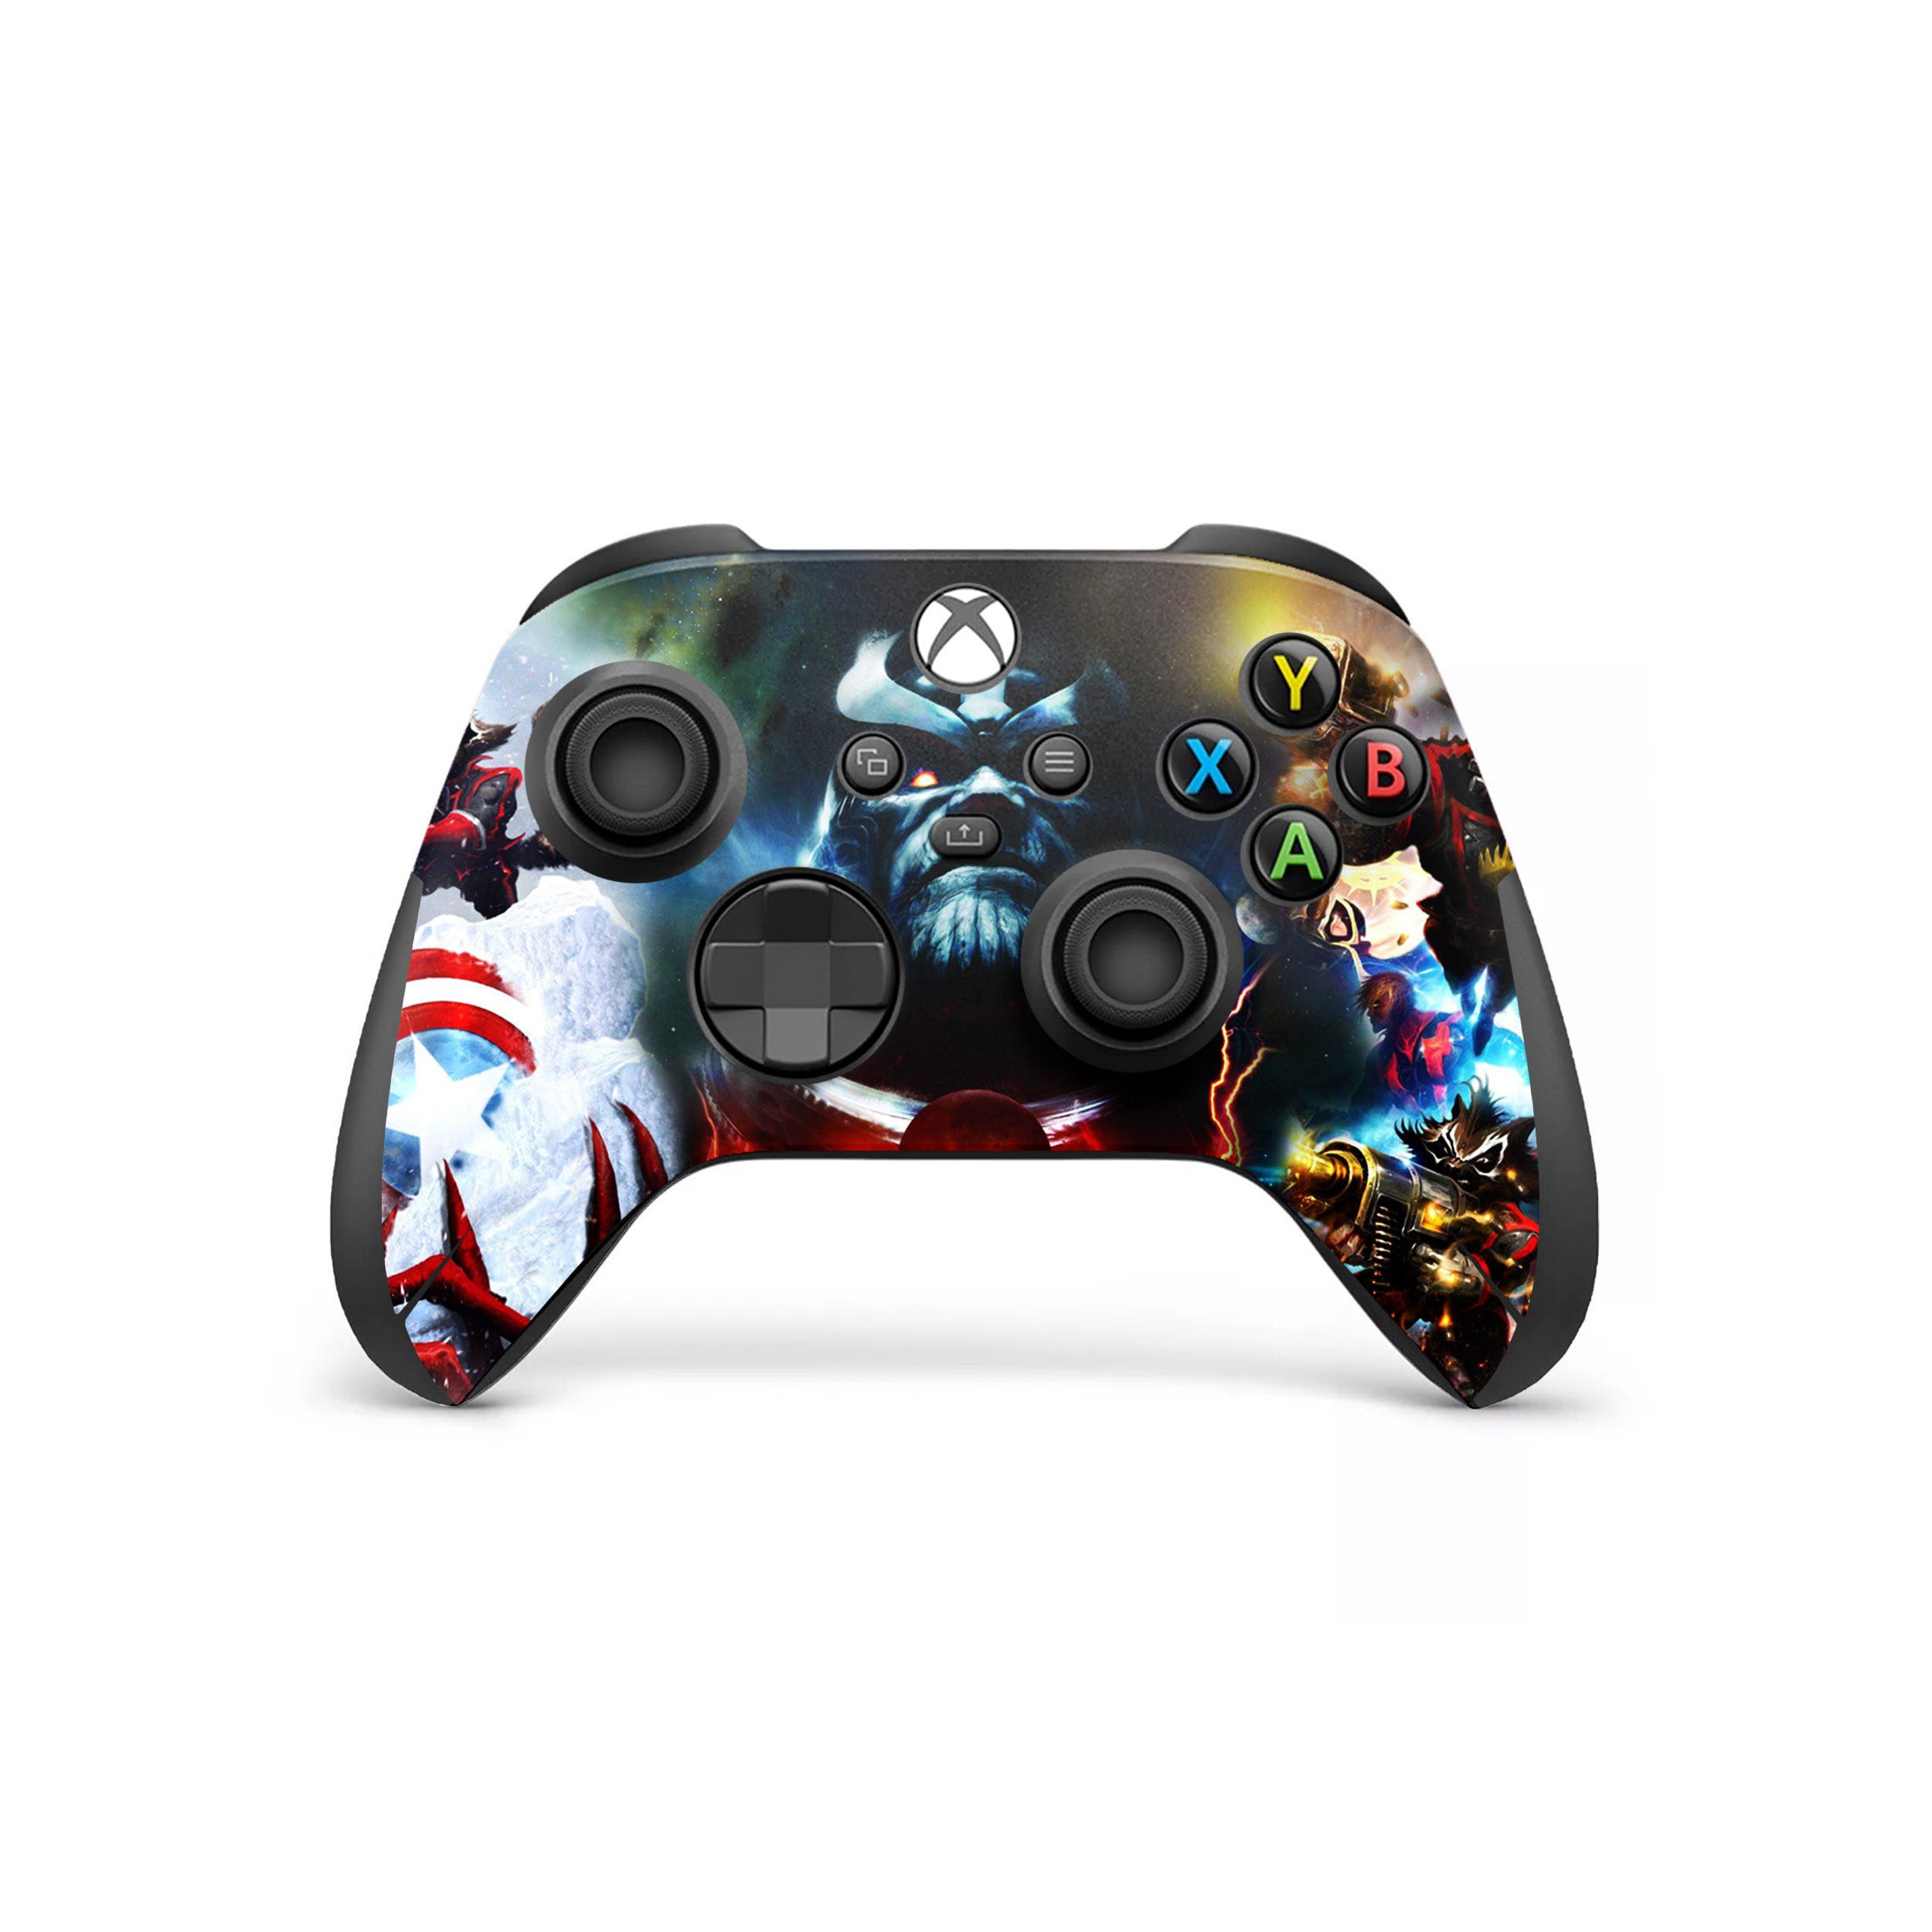 A video game skin featuring a Marvel Thanos design for the Xbox Wireless Controller.